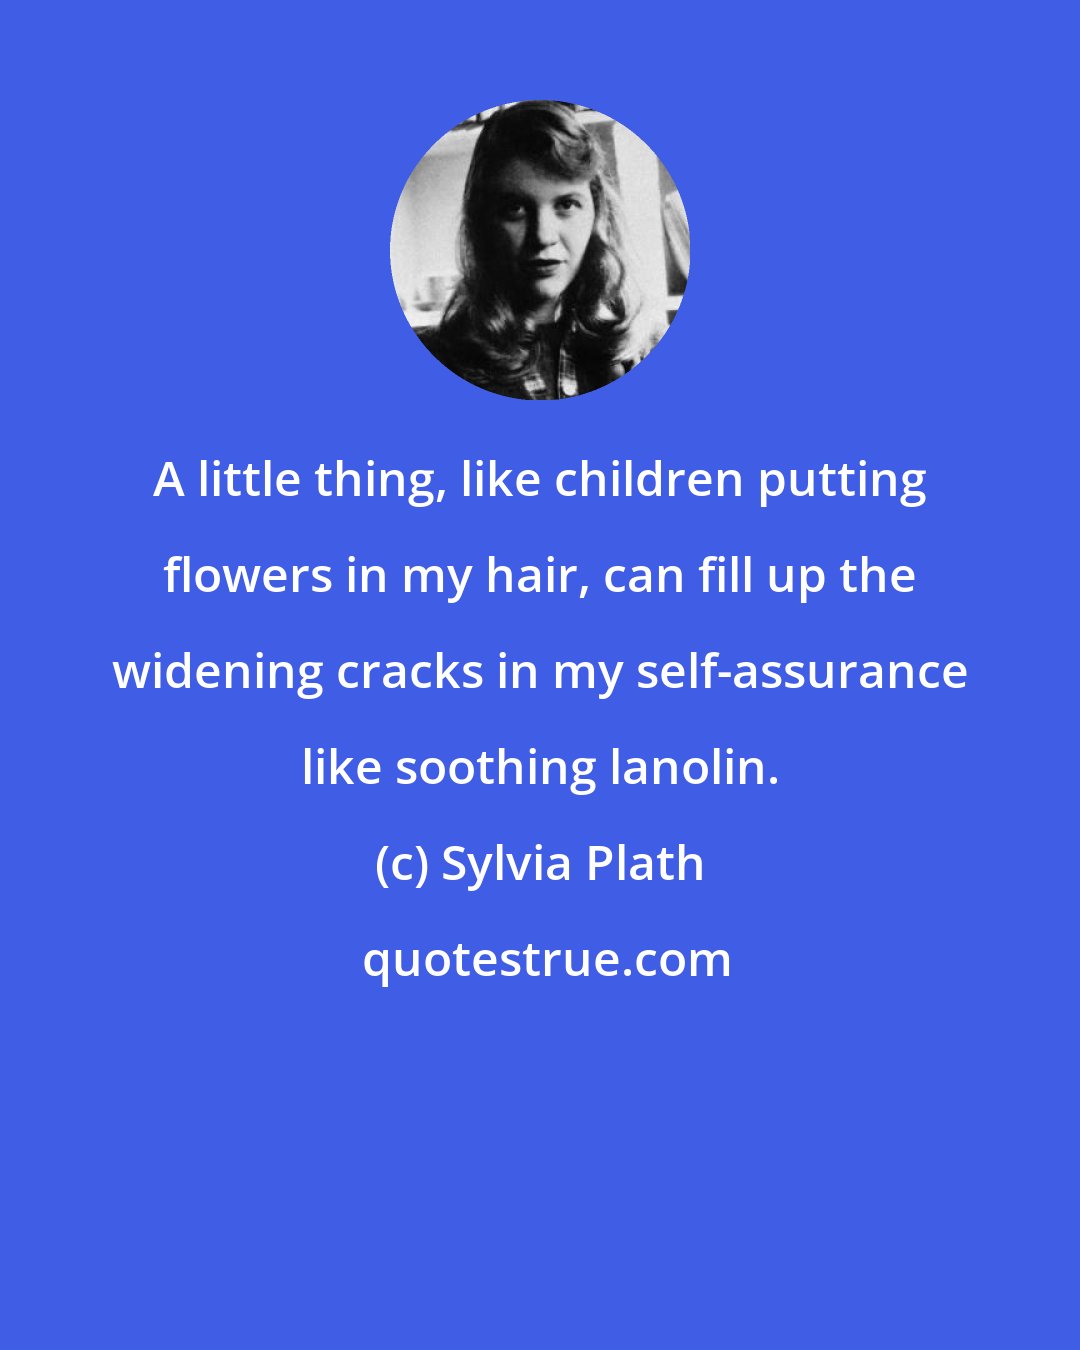 Sylvia Plath: A little thing, like children putting flowers in my hair, can fill up the widening cracks in my self-assurance like soothing lanolin.